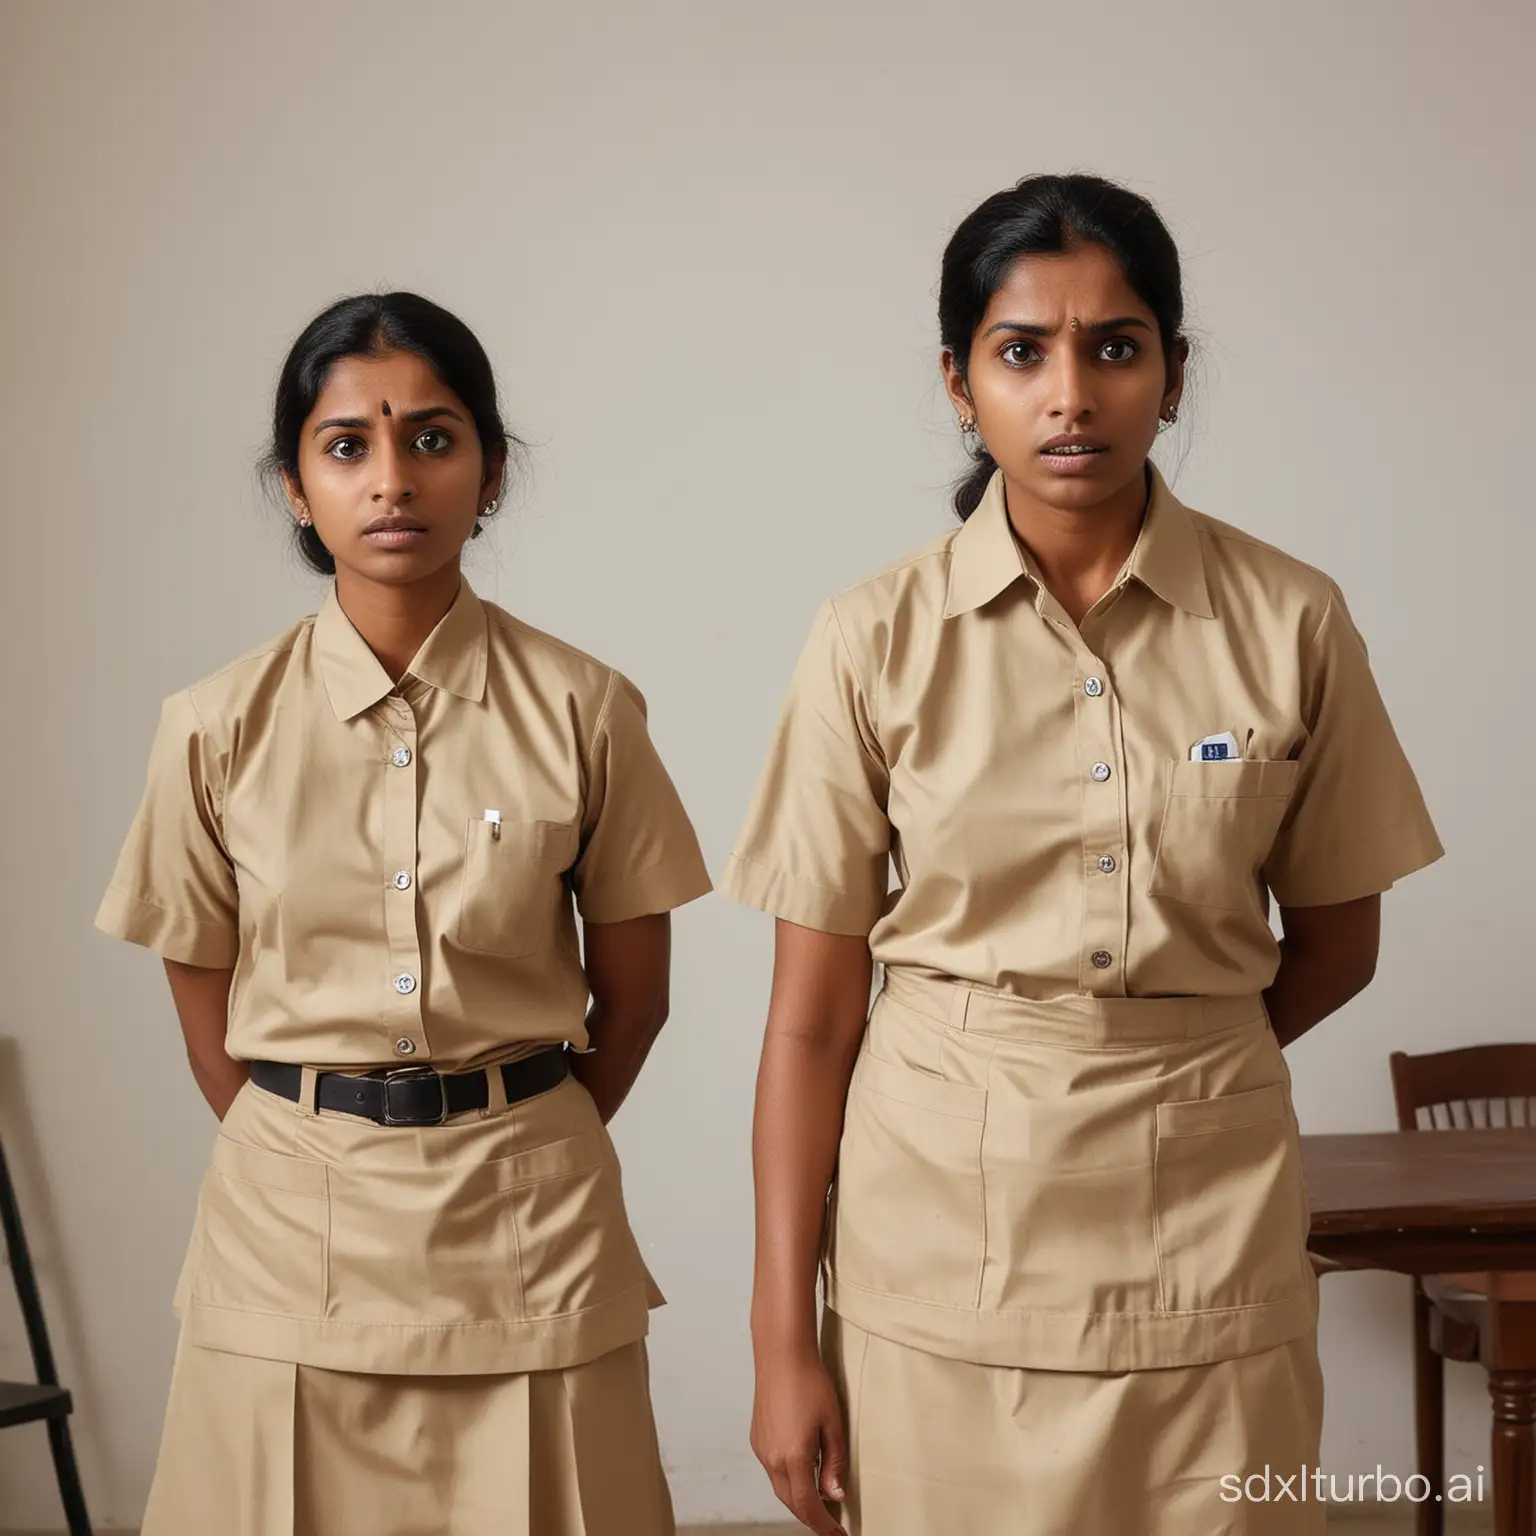 indian house keepers in proper uniform looking shock